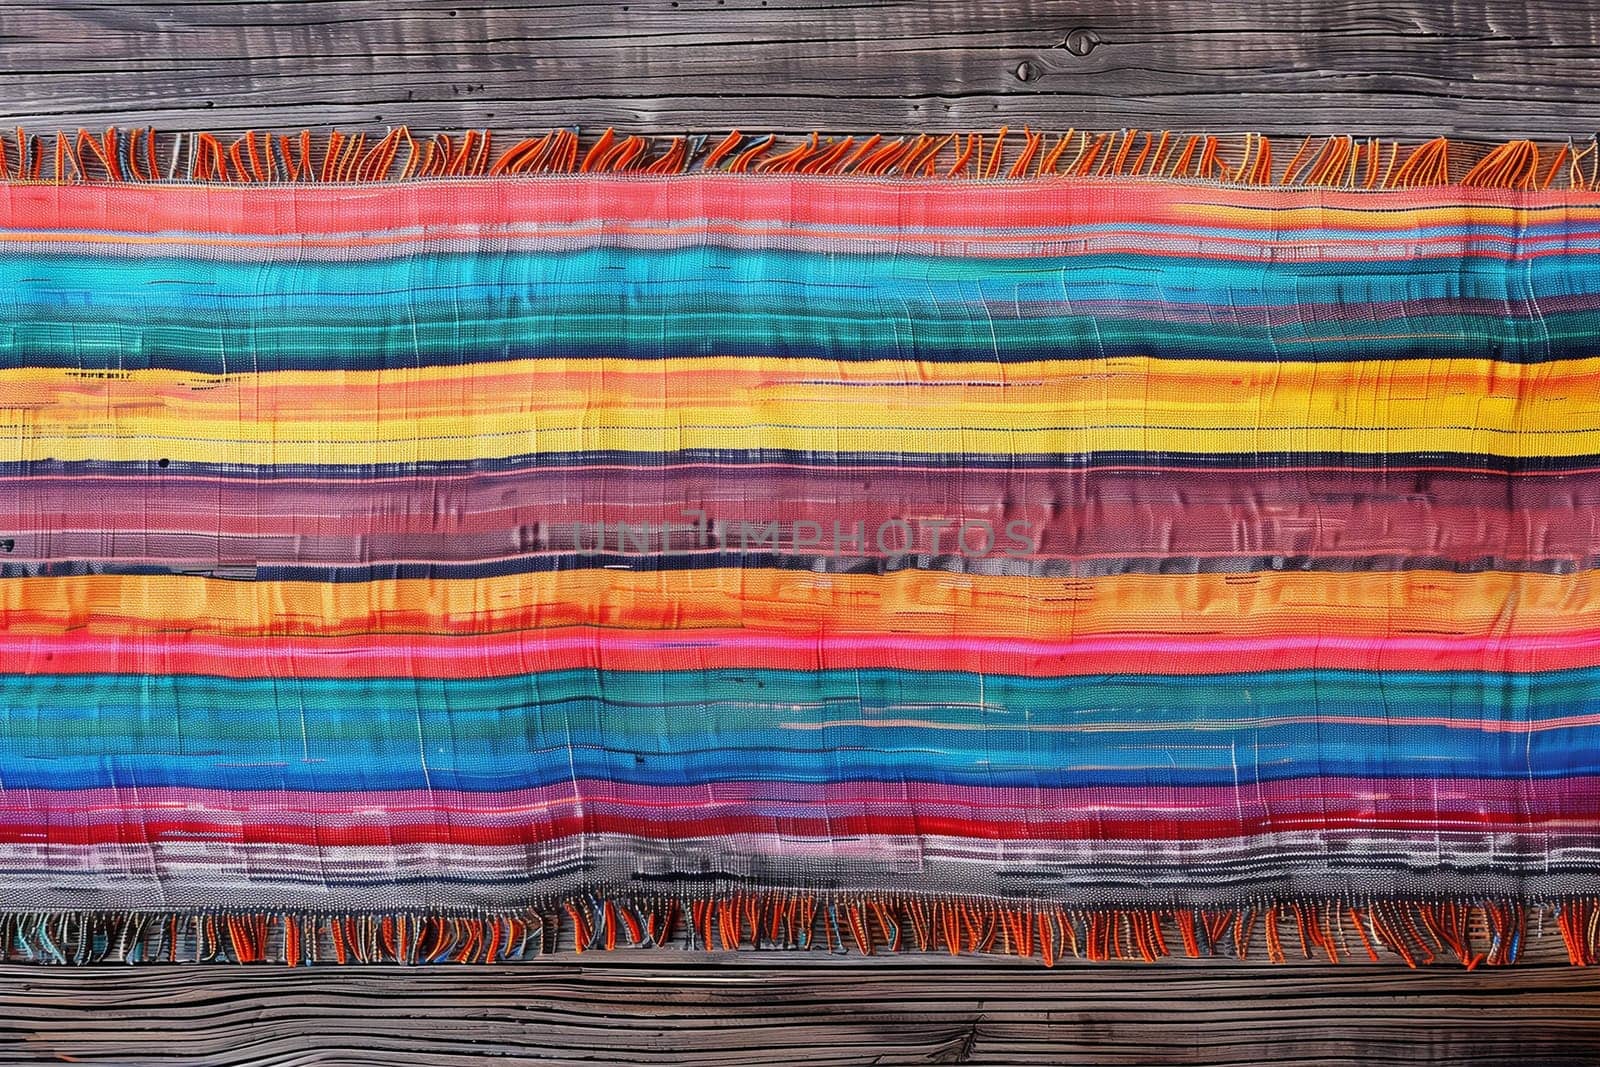 A multicolored blanket is laid out neatly on a wooden surface. The vibrant colors contrast beautifully with the rustic wood.